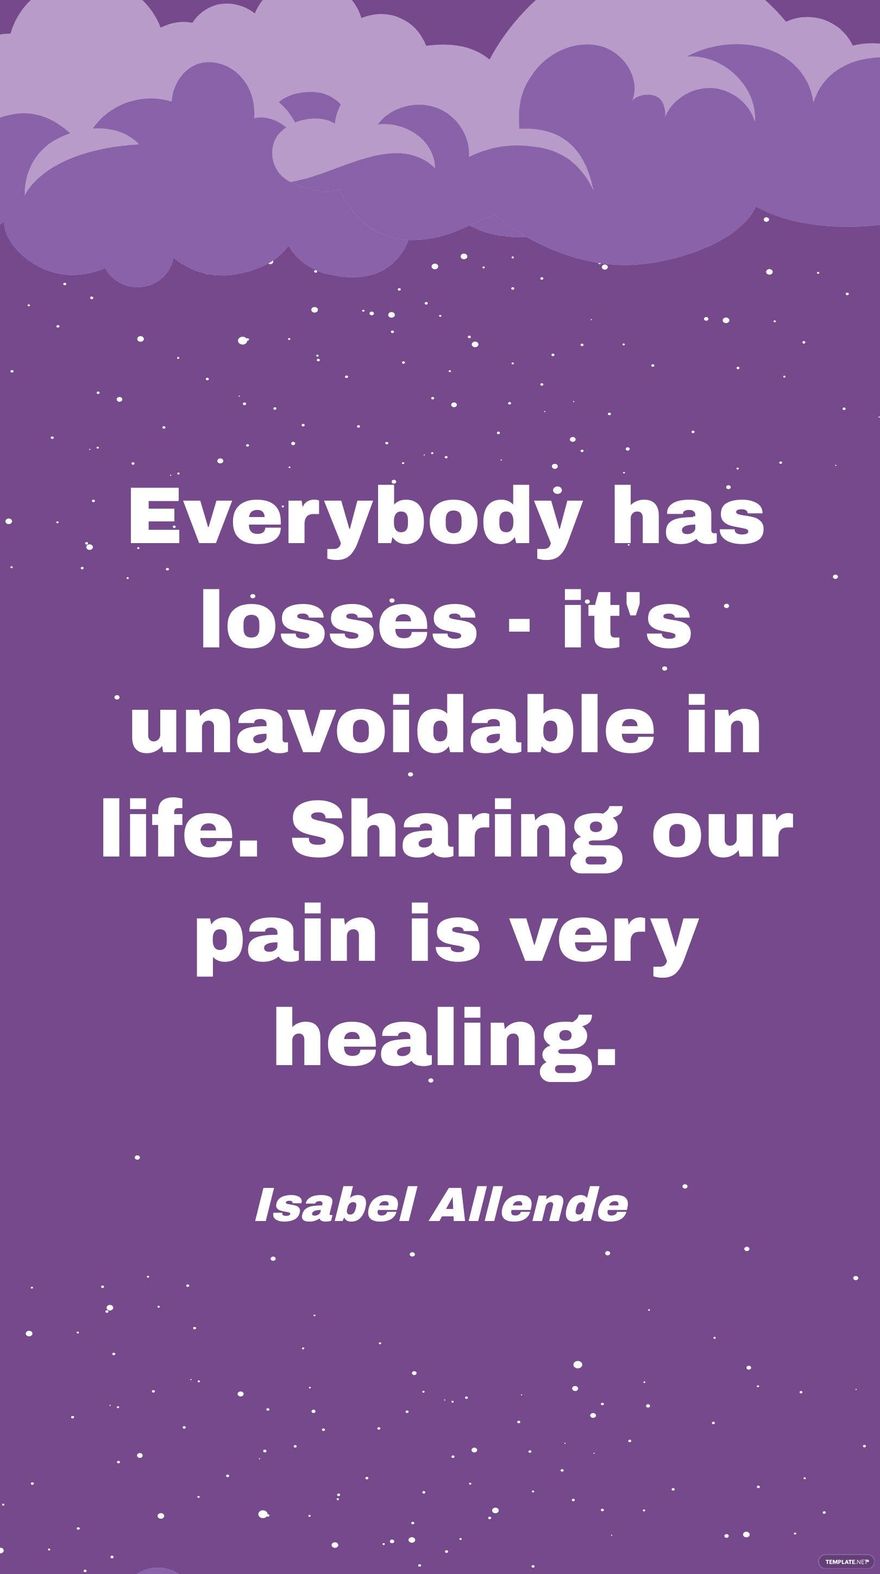 Free Isabel Allende - Everybody has losses - it's unavoidable in life. Sharing our pain is very healing. in JPG